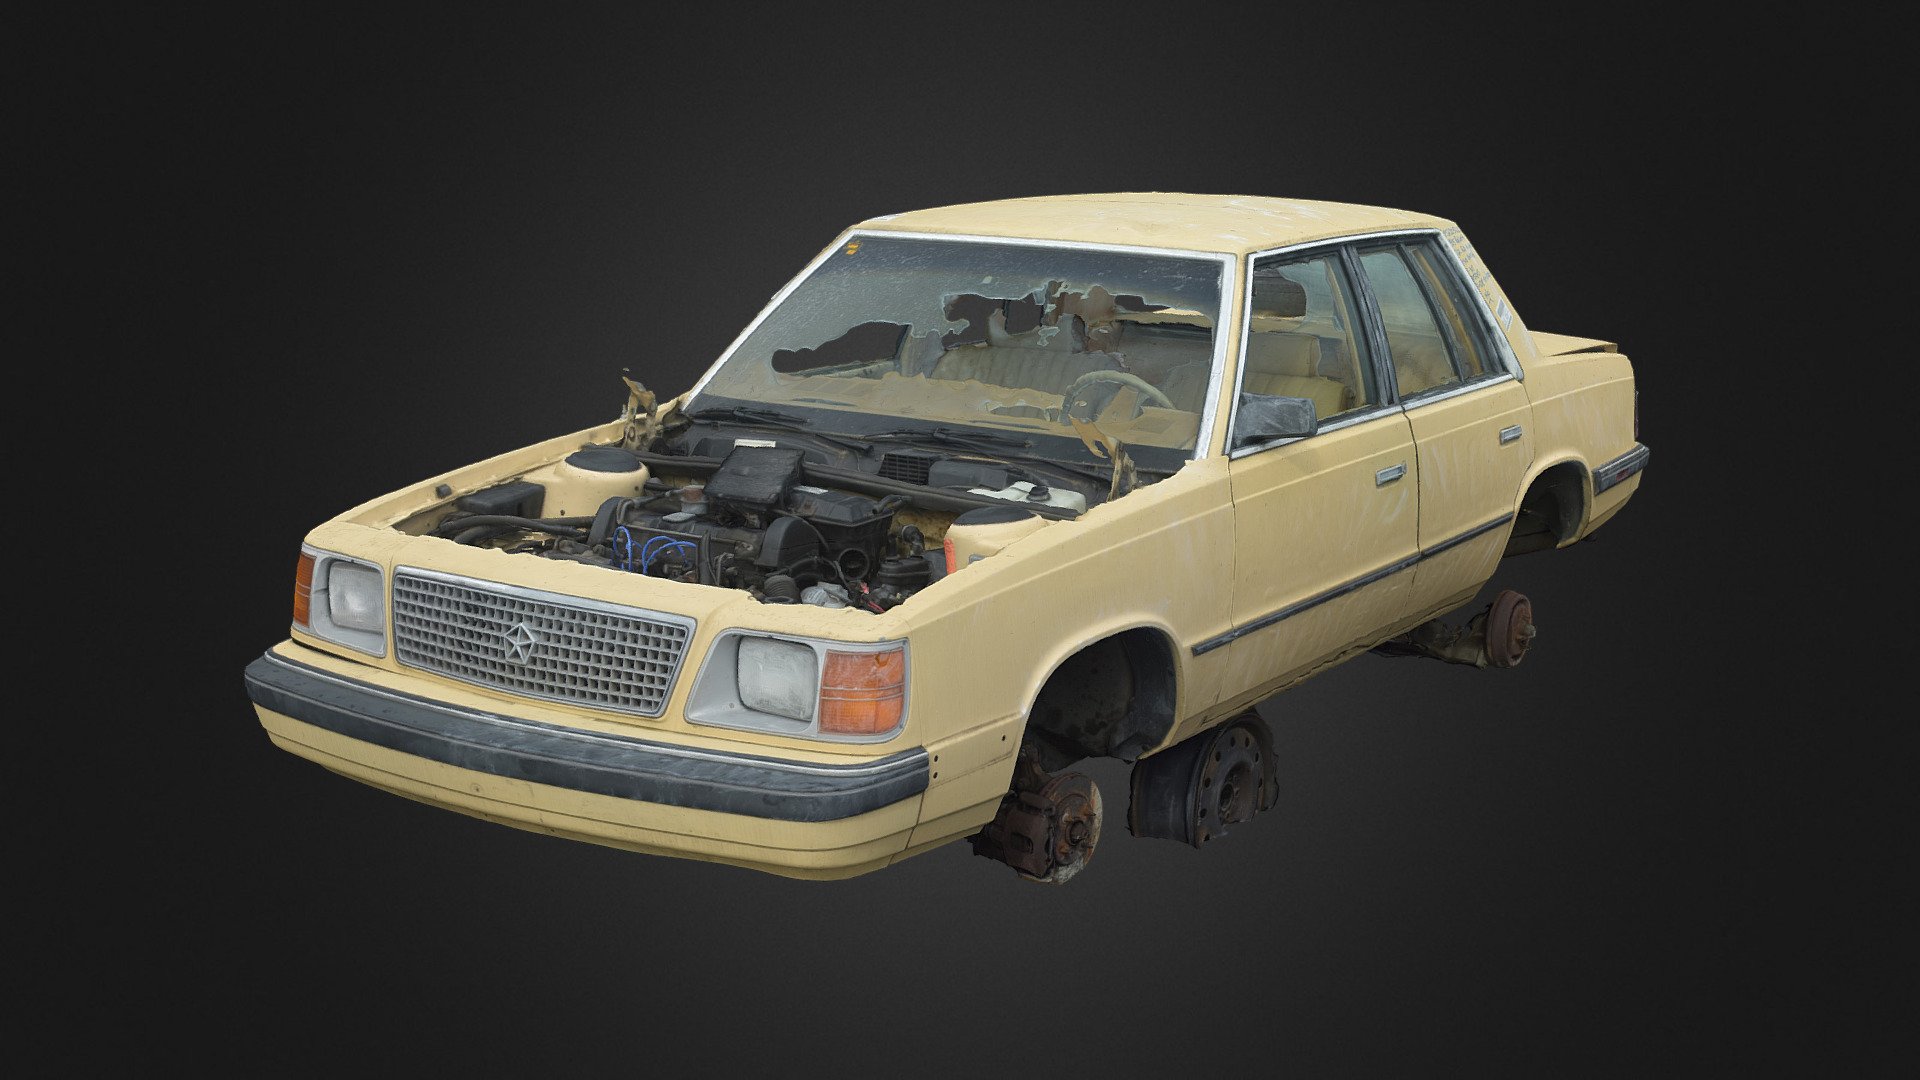 High-accuracy photoscan Intended for use as modeling reference.

Photos taken with my Nikon D3400 and polarizing filter

Created in RealityCapture from 1194 images - 1985-1989 Reliant 4-door [Scan] - 3D model by Rush_Freak 3d model